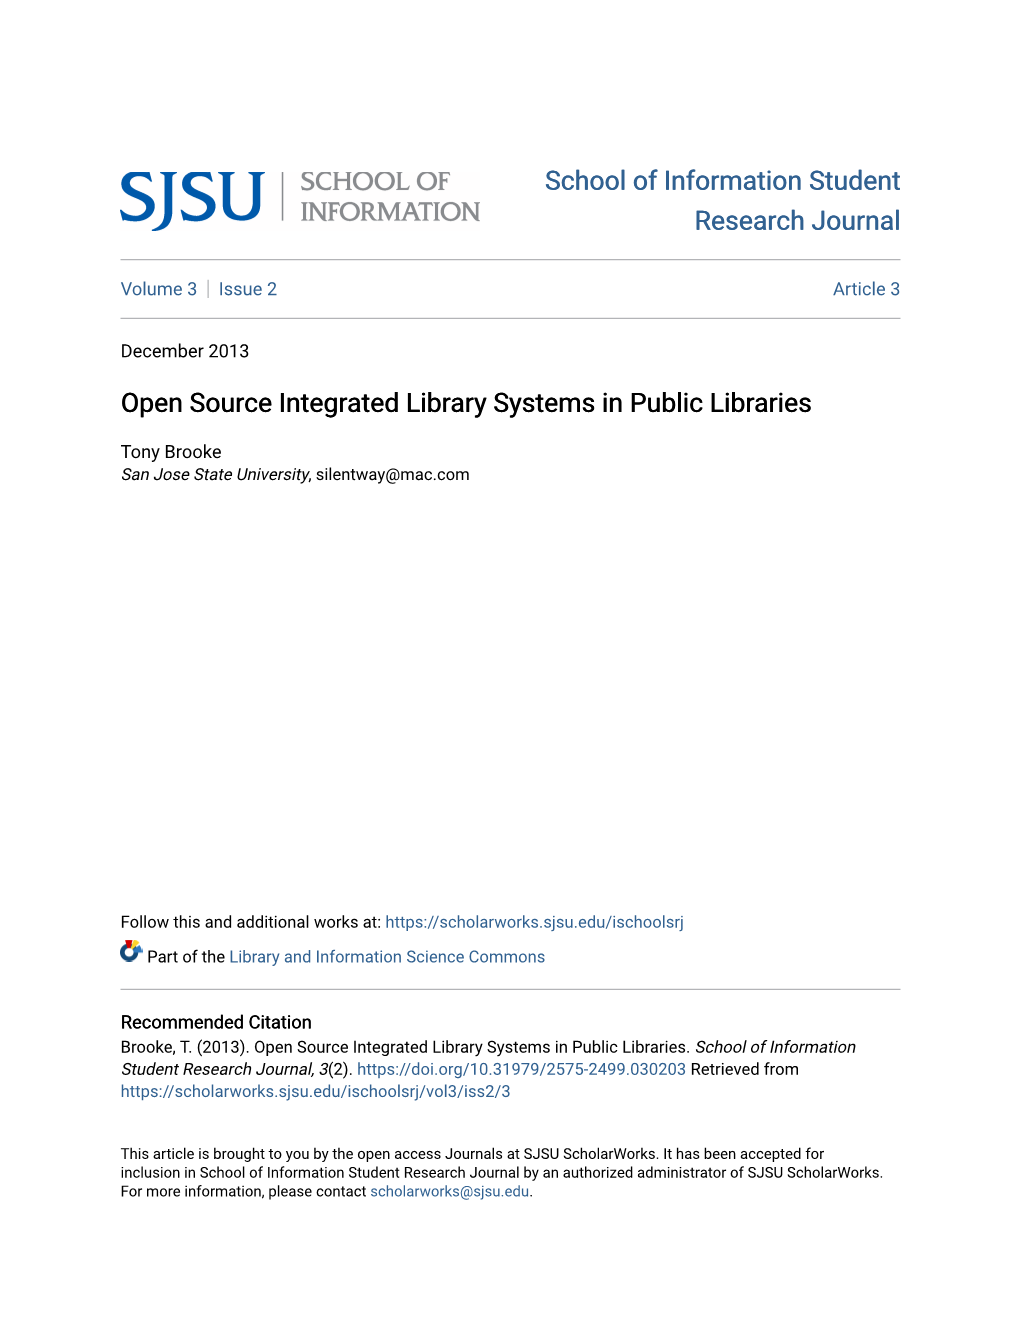 Open Source Integrated Library Systems in Public Libraries